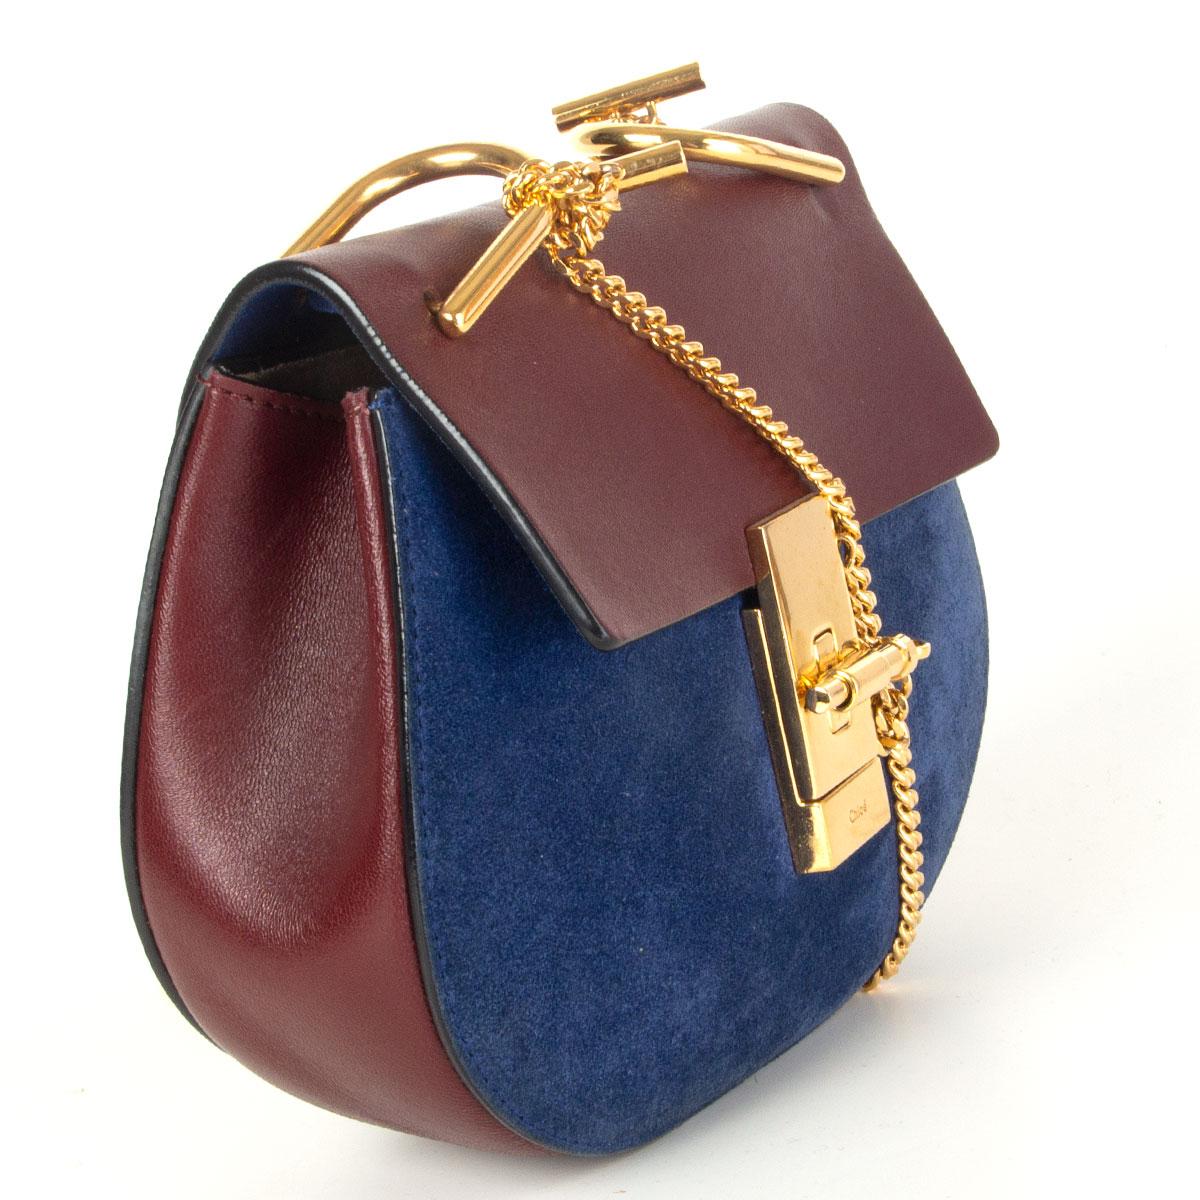 authentic Chloé 'Drew Mini' shoulder bag in blue suede and burgundy calfskin featuring gold-tone hardware. Opens with a pin and clasp-fastening front flap and is unlined with one open pocket against the back. Has been carried with some soft patina